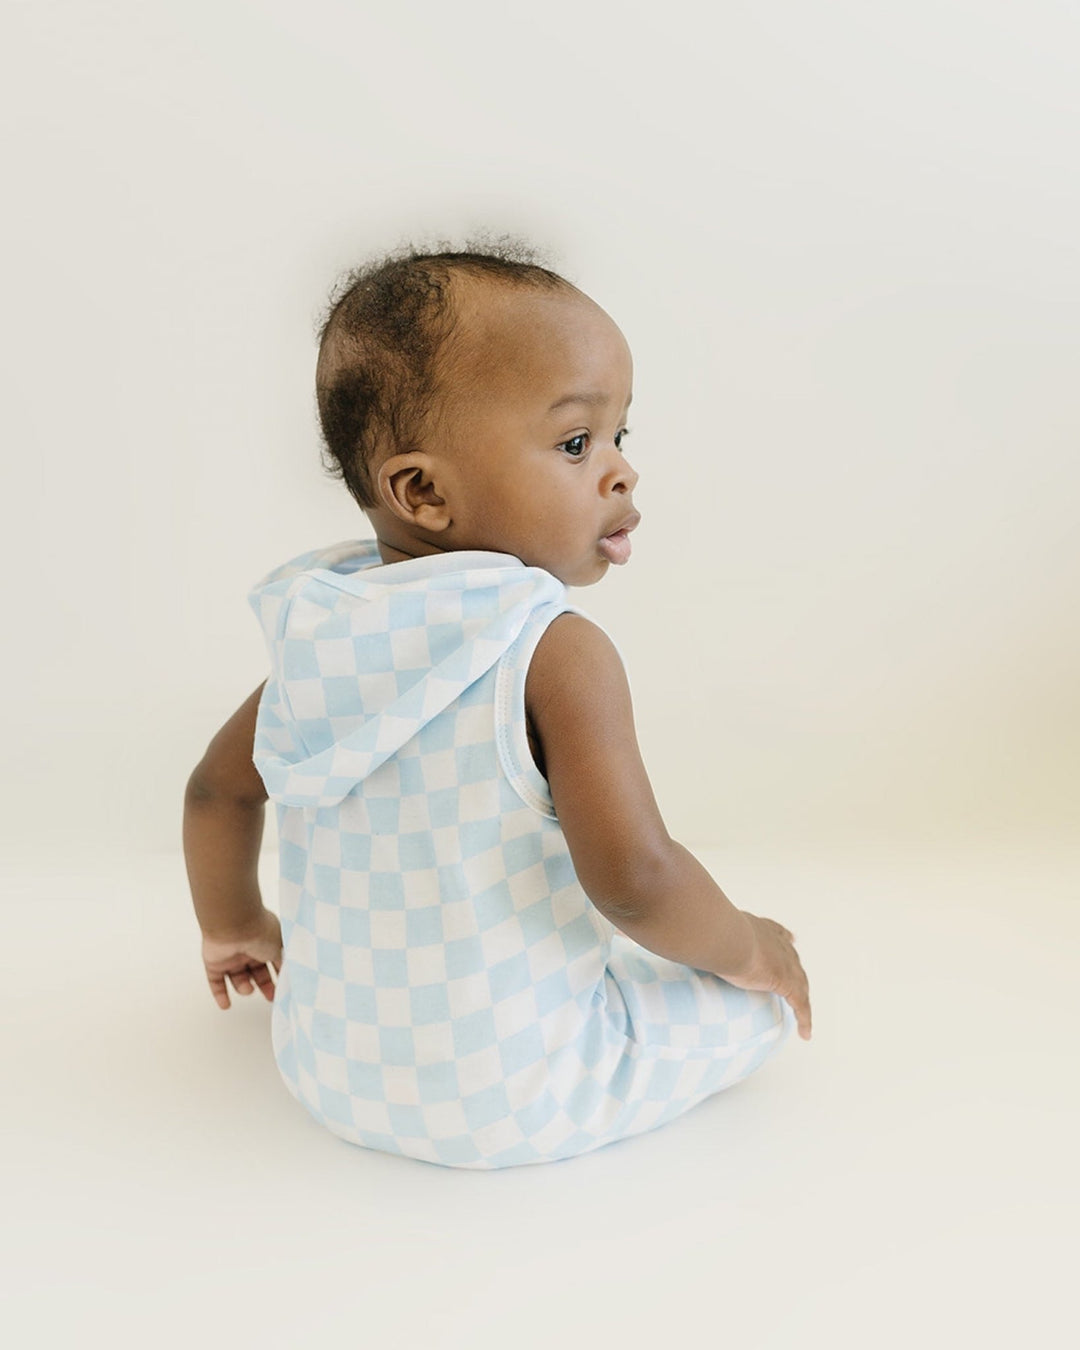 Hooded Shorty Romper, Blue Checkers - Baby & Toddler Clothing - LUCKY PANDA KIDS